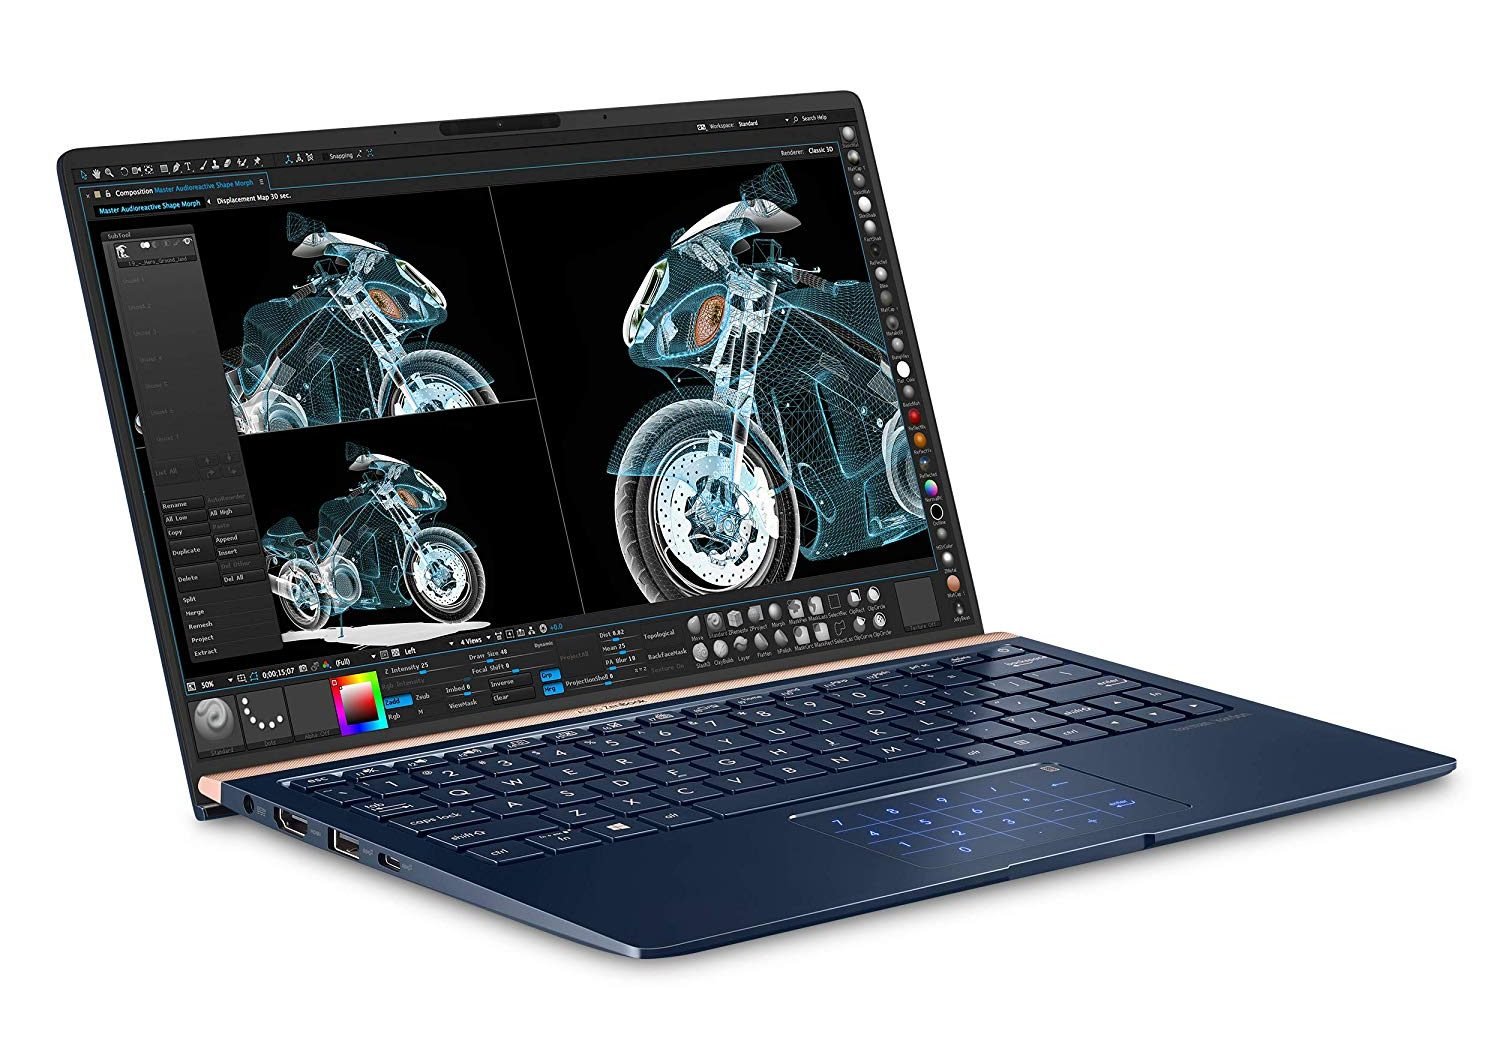 asus zenbook laptop for college students